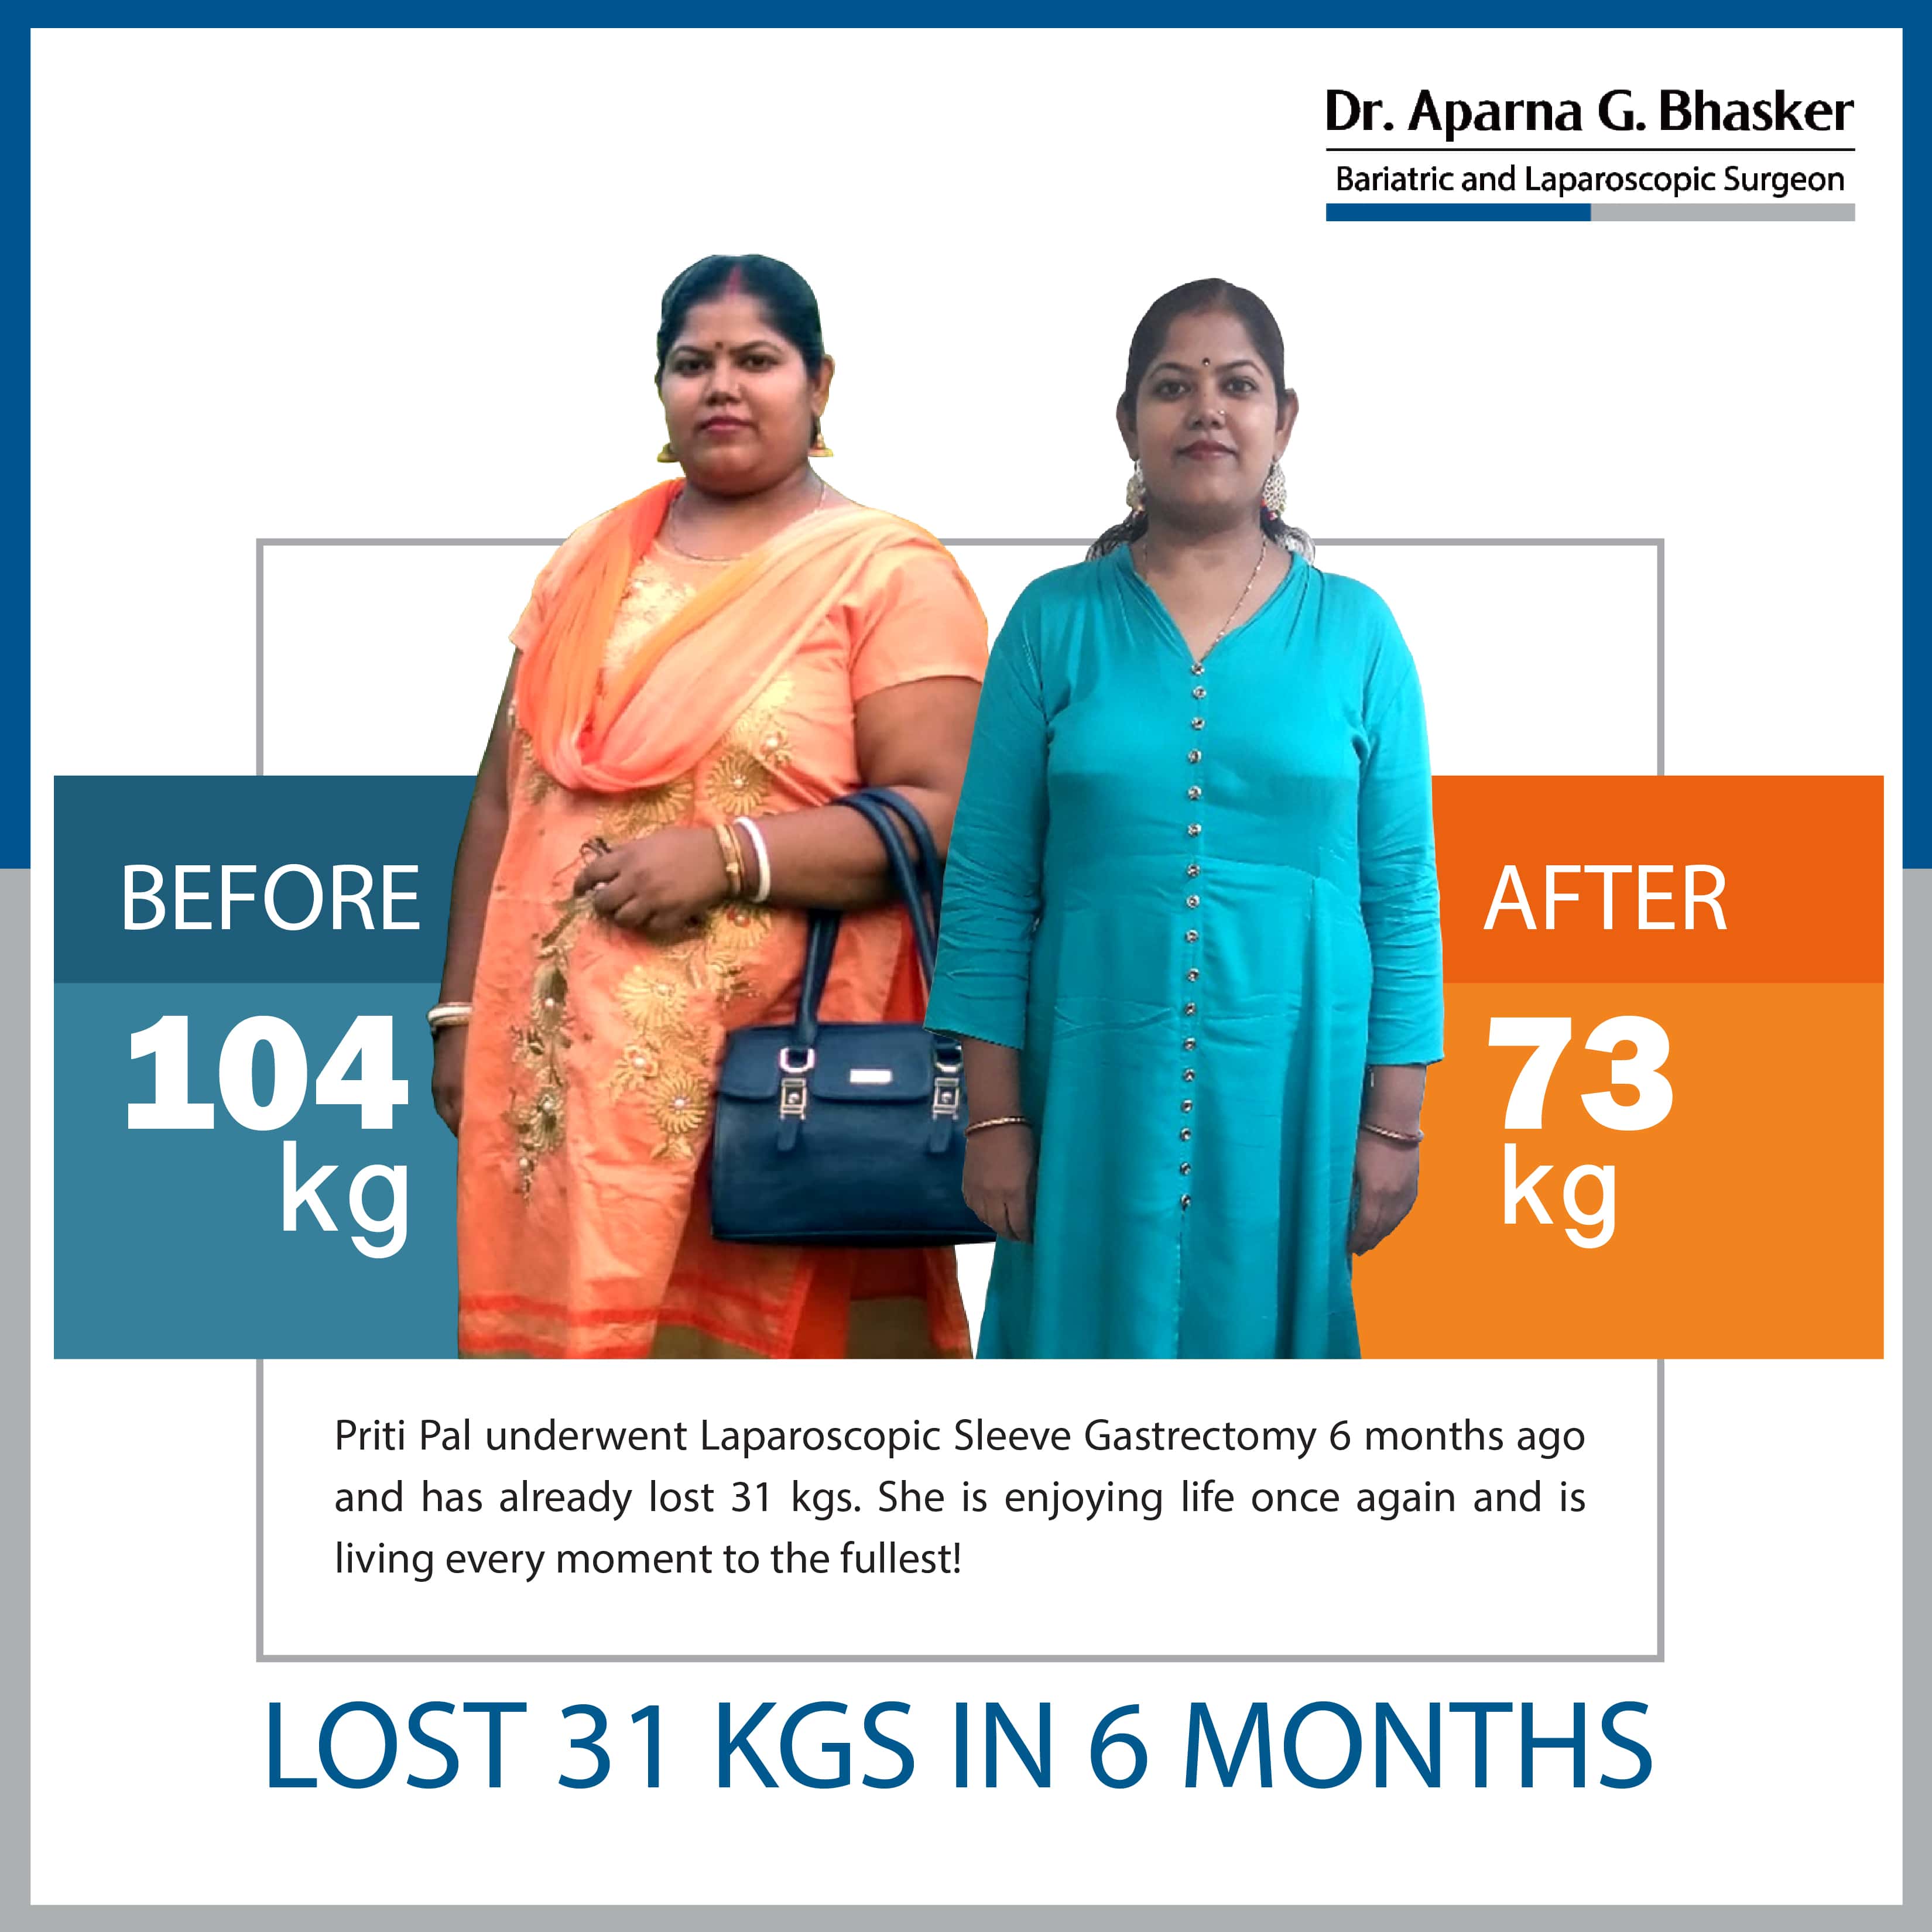 best Roux-en Y Gastric Bypass bariatric surgery and weight loss surgery cost in mumbai india before after photos (5)